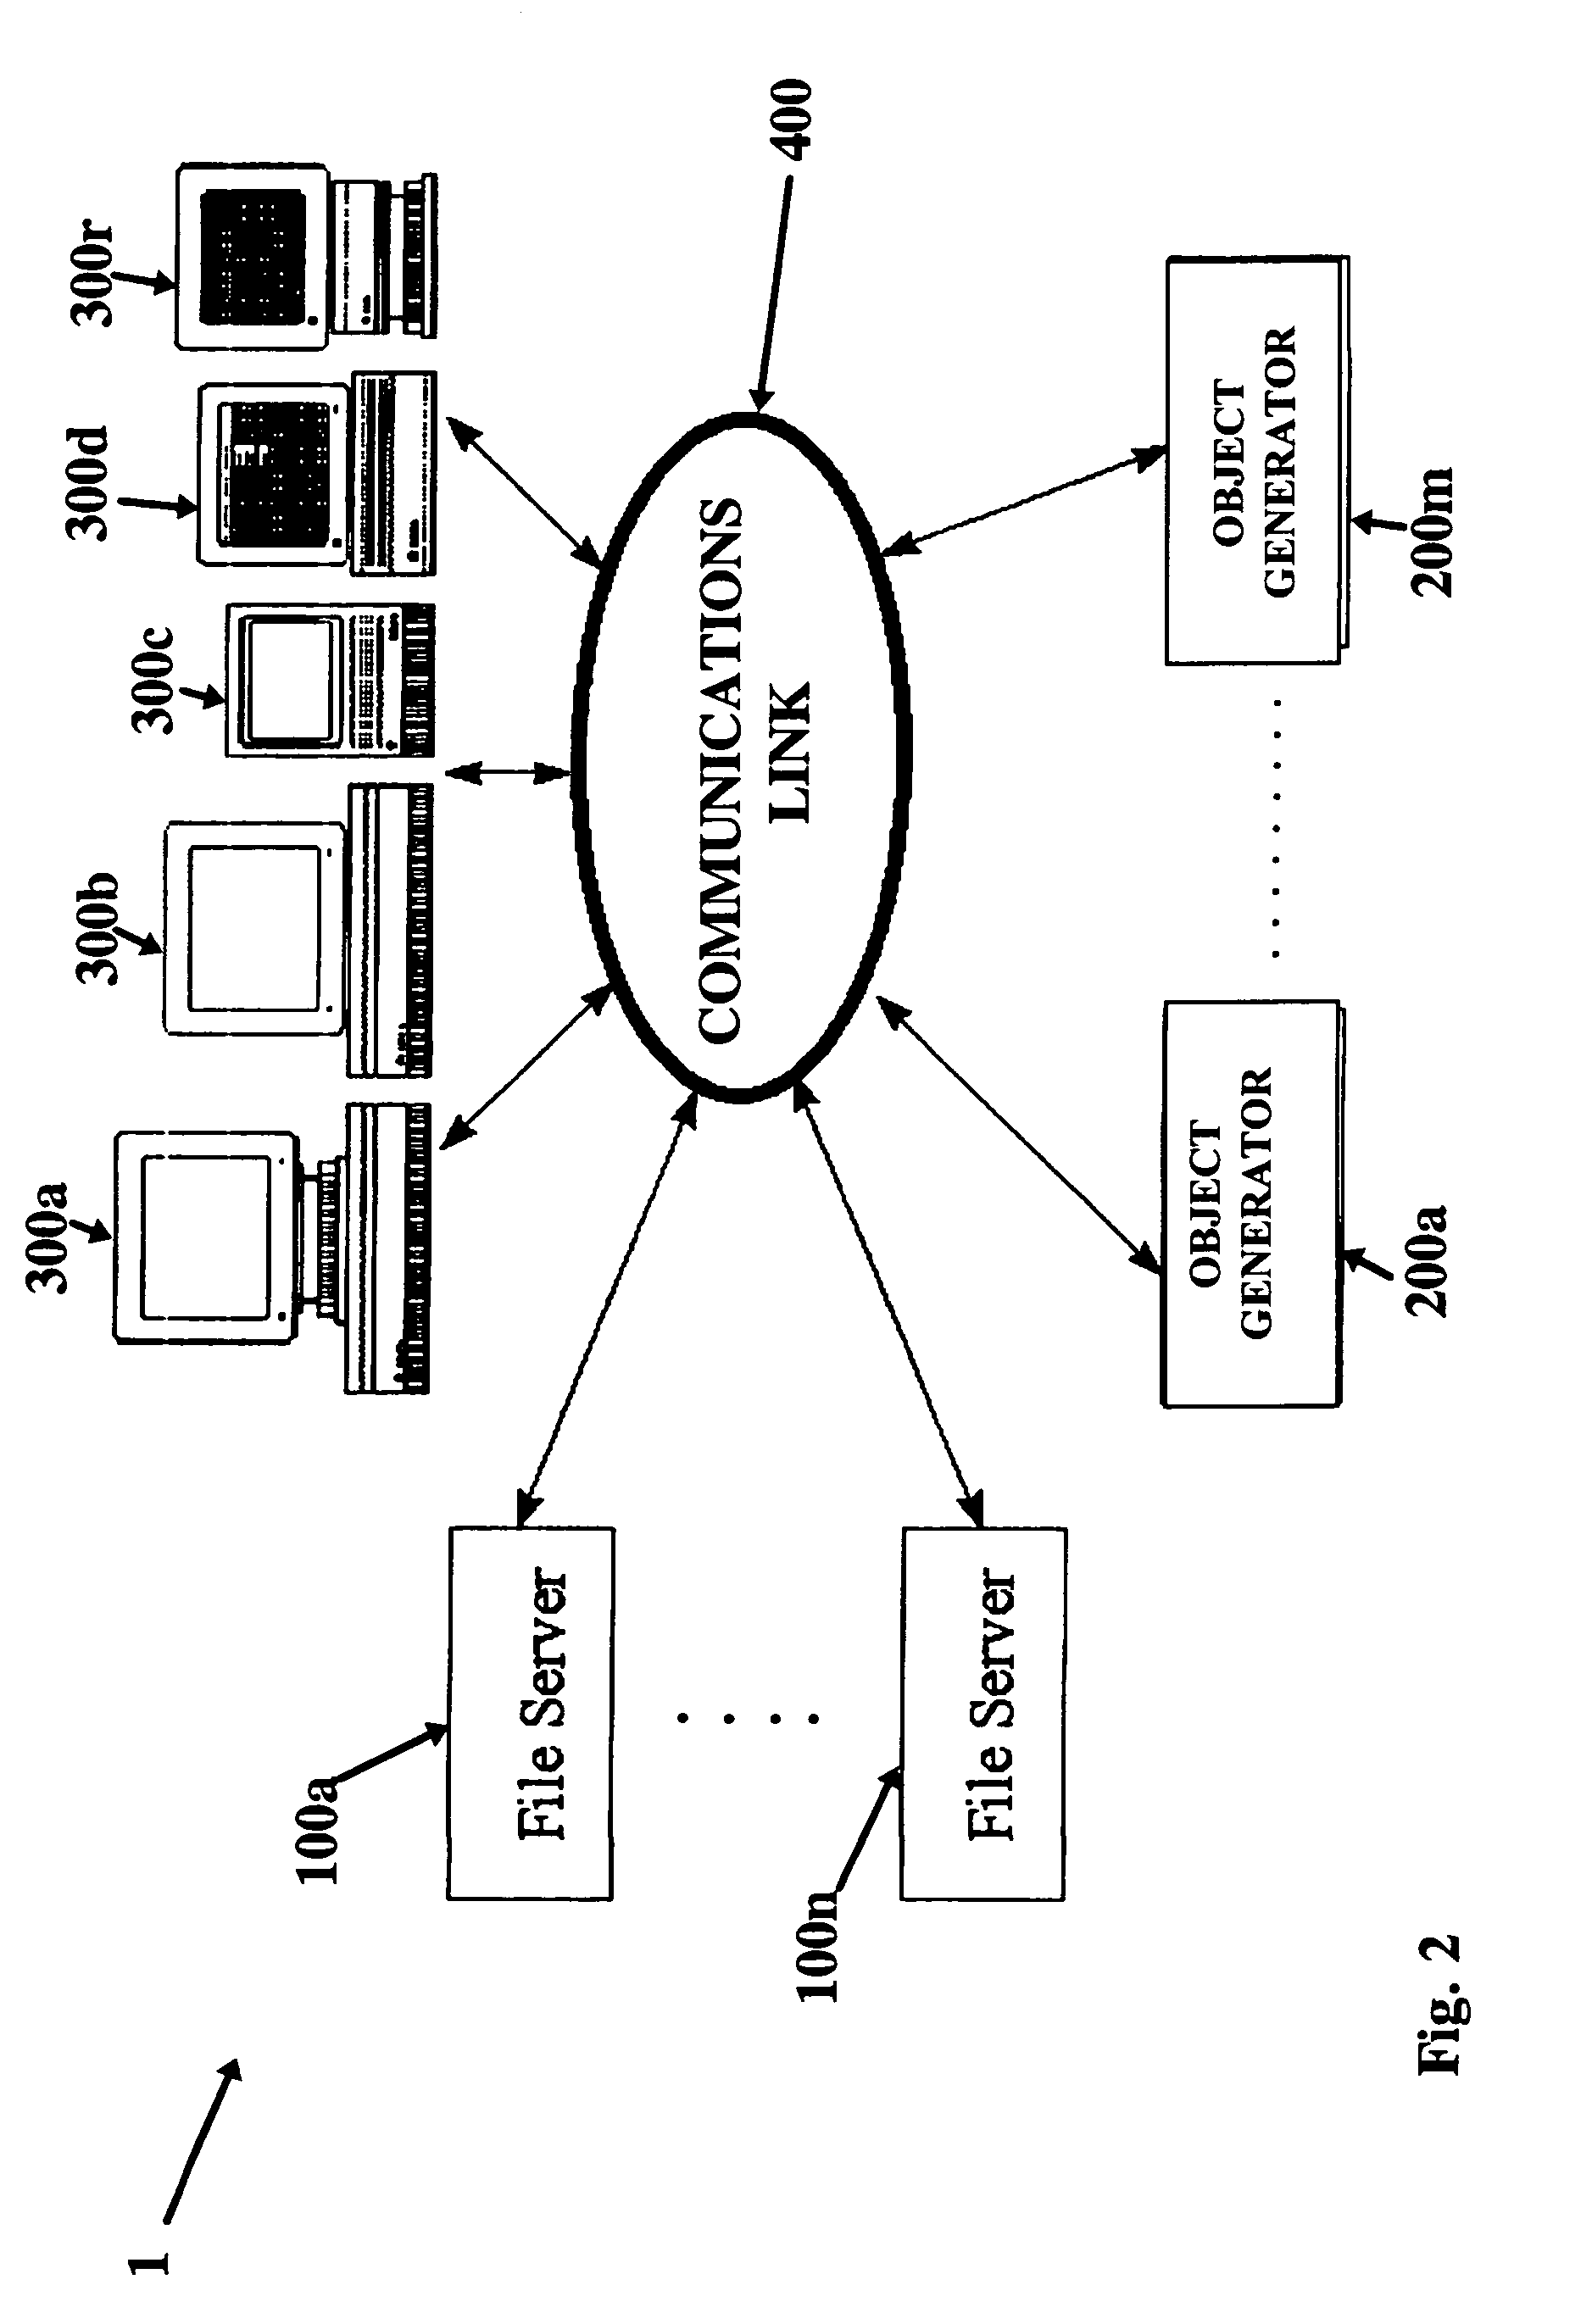 Method for facilitating collaborative development efforts between widely dispersed users